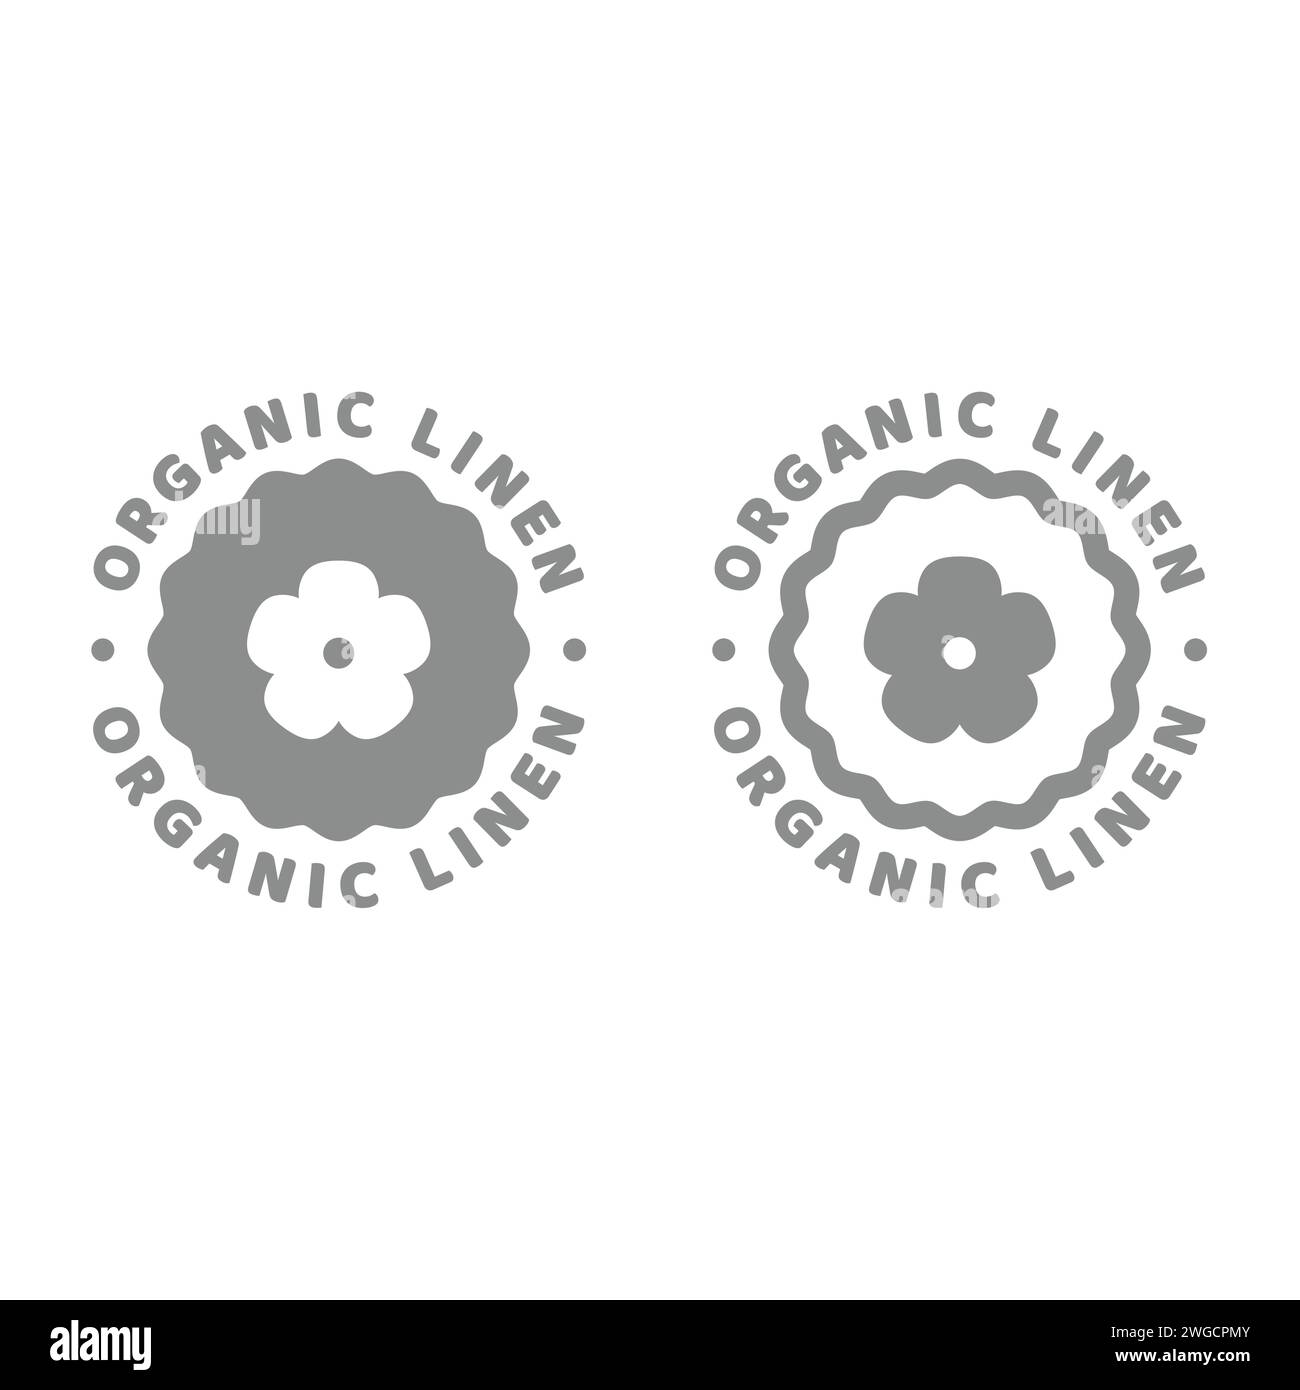 Organic linen vector label. Textile and fabric stamp. Stock Vector